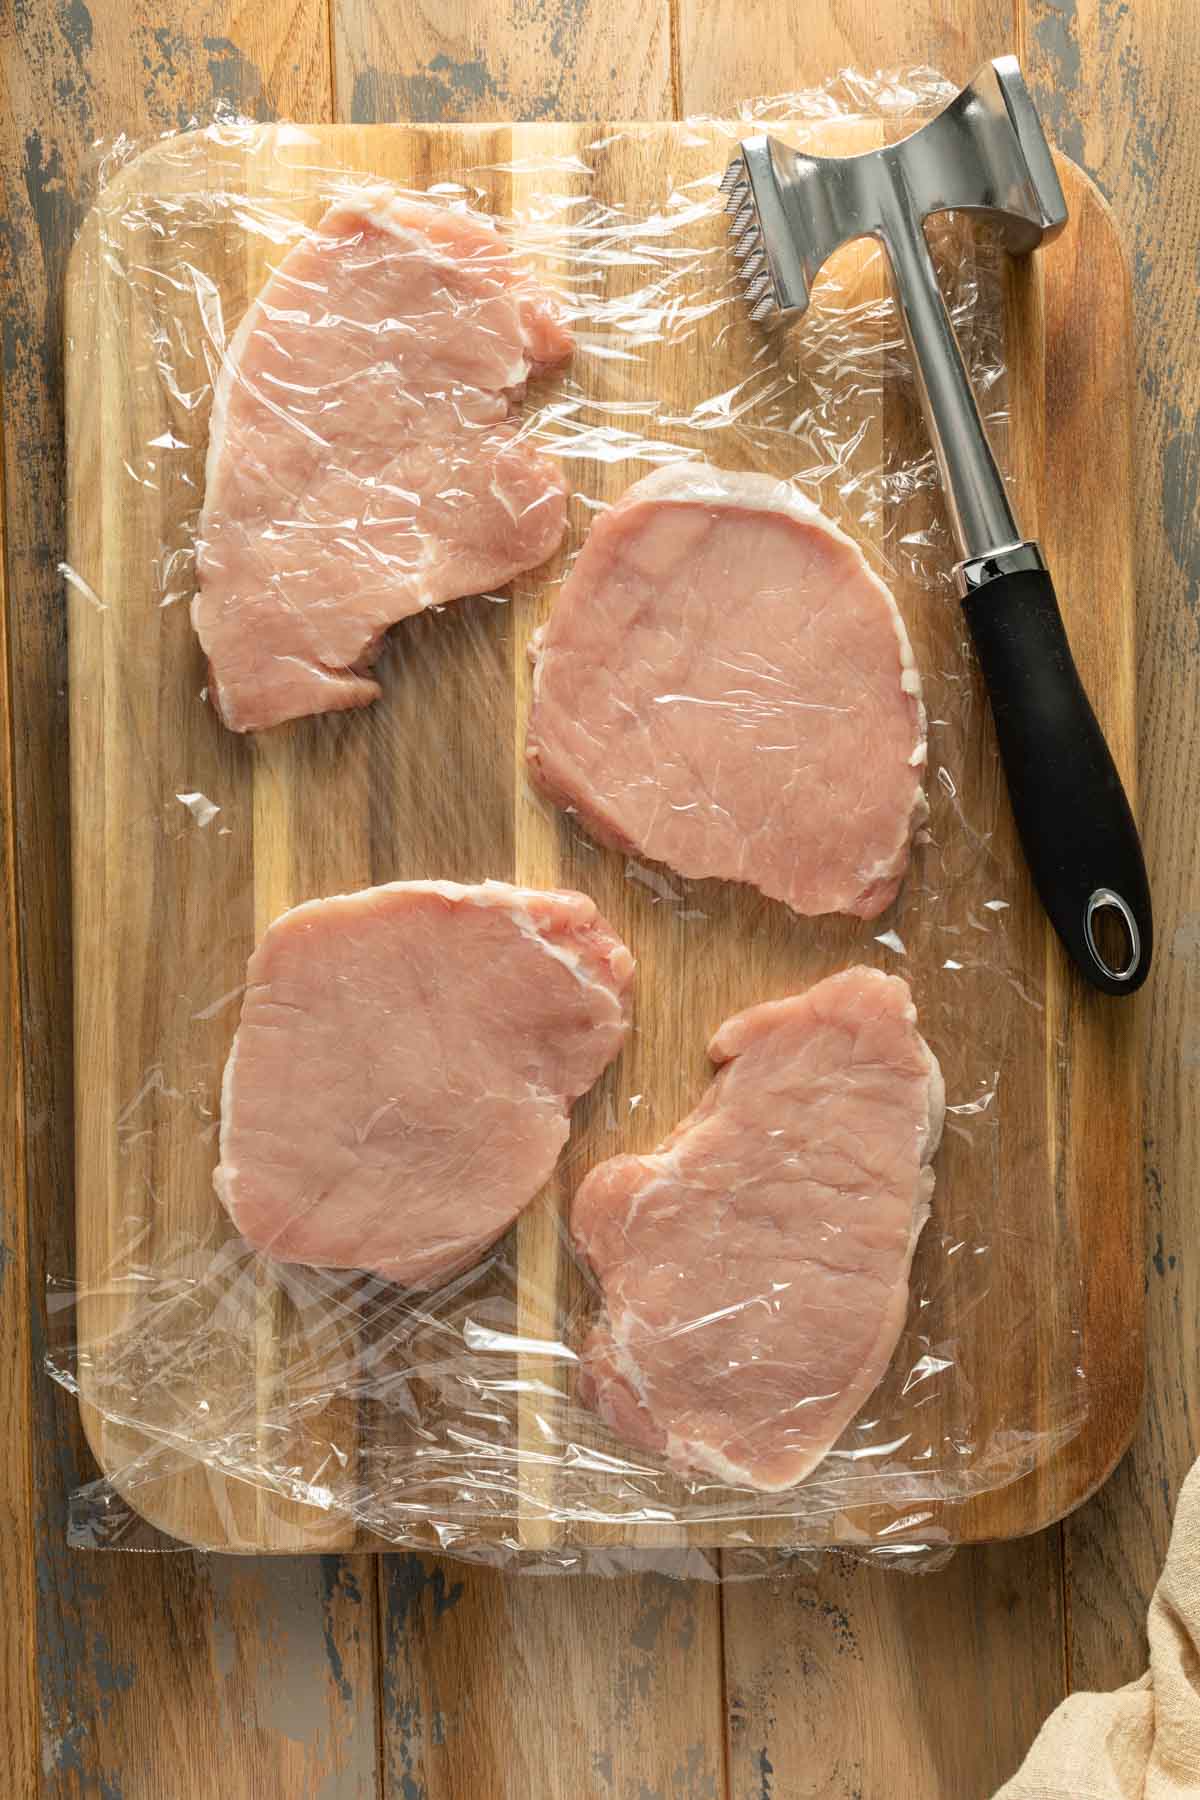 Pork chops on a wooden board in between plastic wrap with a mallet next to them.